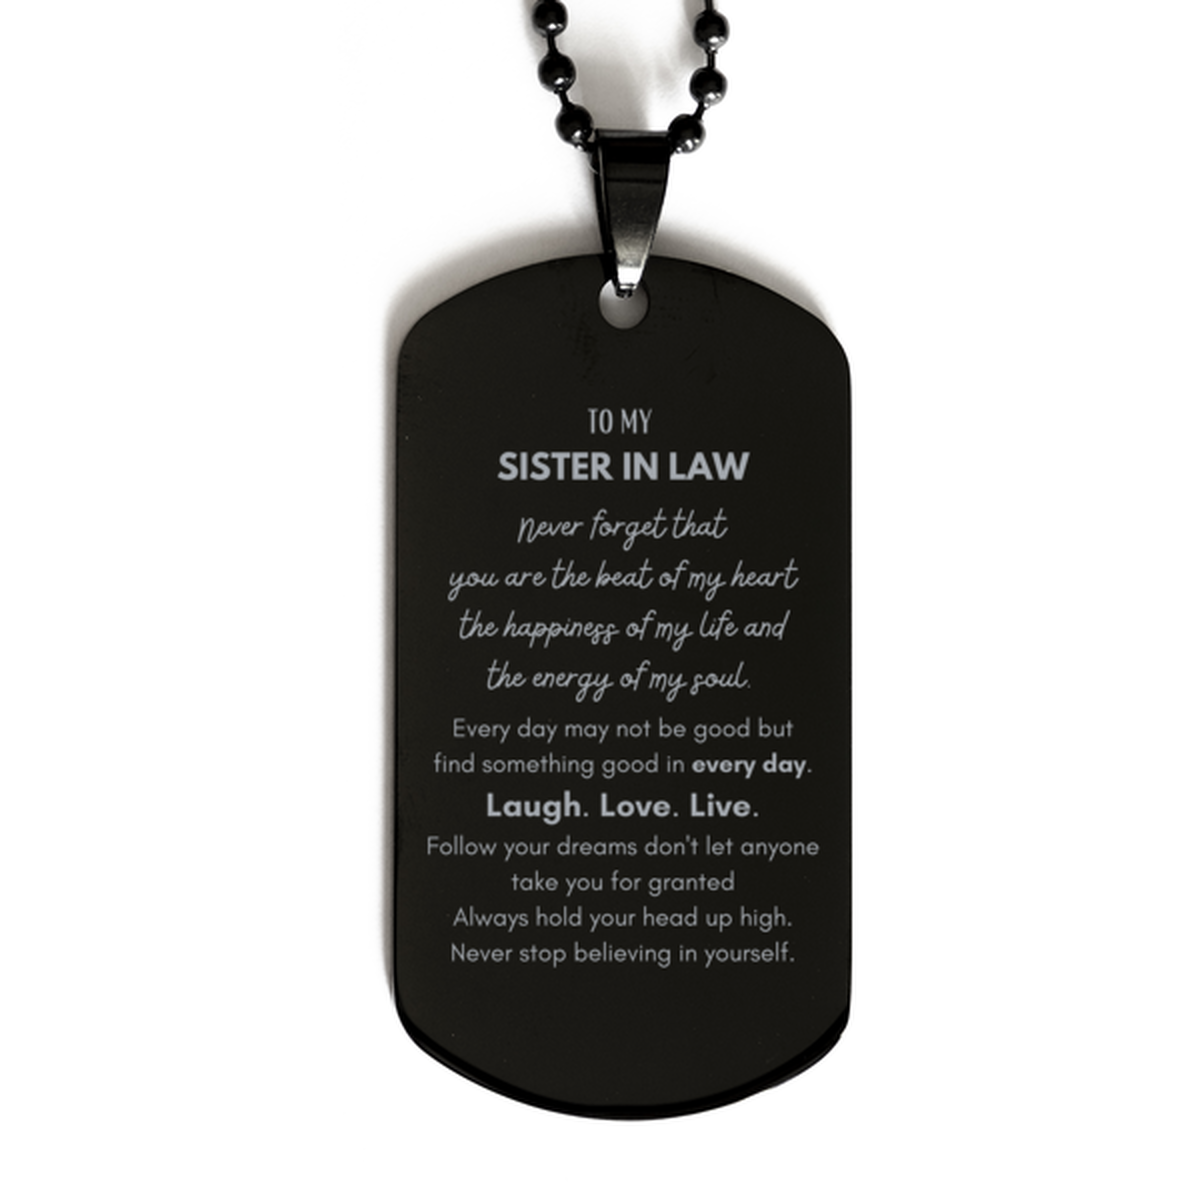 To My Sister In Law Dogtag Gifts, Christmas Sister In Law Black Dog Tag Present, Birthday Unique Motivational For Sister In Law, To My Sister In Law Never forget that you are the beat of my heart the happiness of my life and the energy of my soul